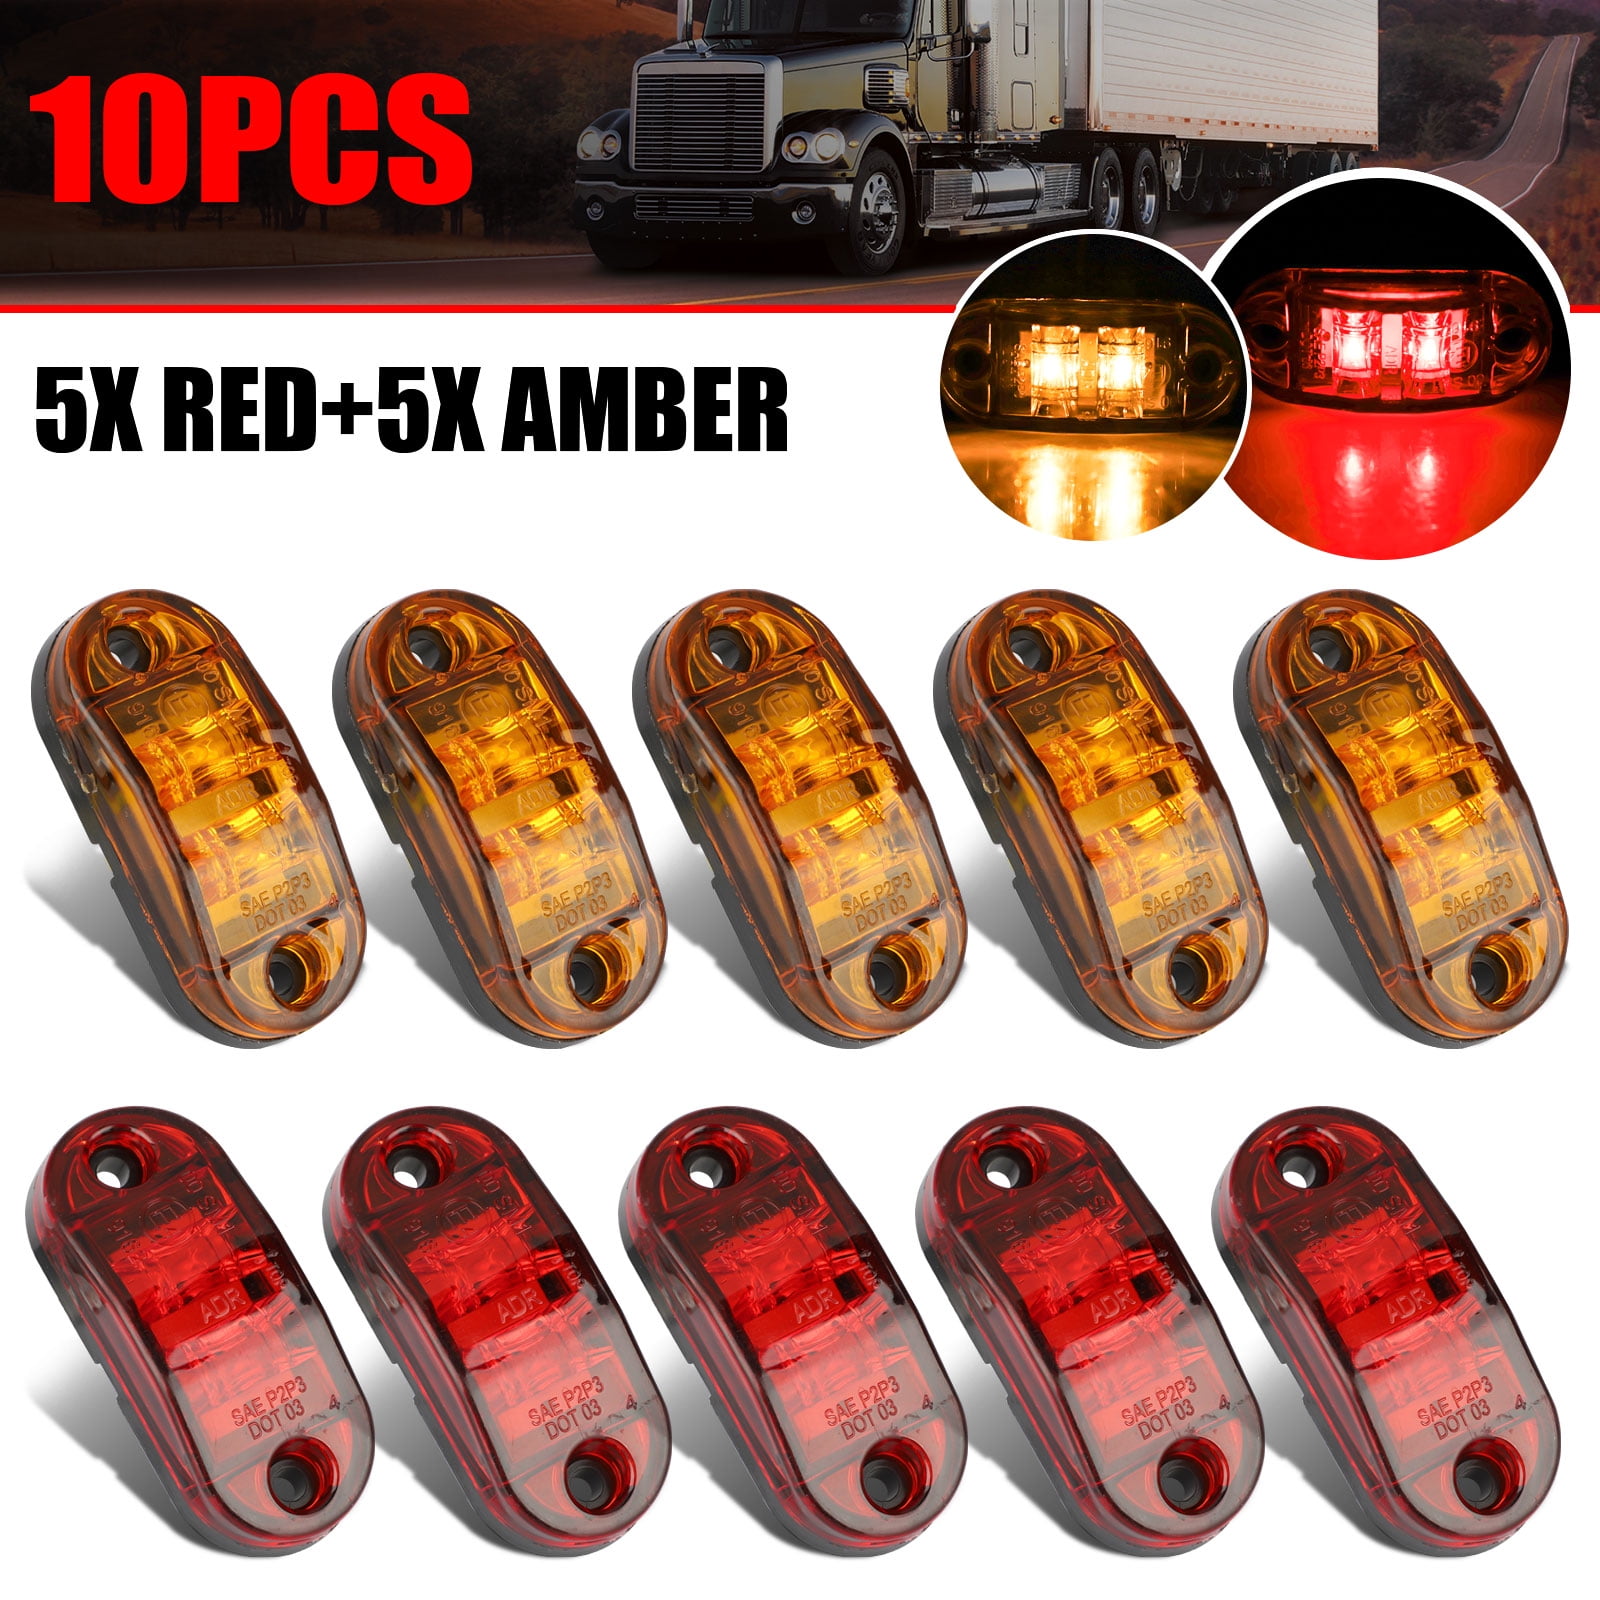 LedVillage Pack of 20 10 Red LED Side Marker Lights Clearance Lamp Ultra Bright Surface Mount Jeep Pickup Van Car Trailer Motorhome Truck GMC 10-30v DC w/Chrome Bezel AA1030 2.5 Inch Mini 10 Amber 